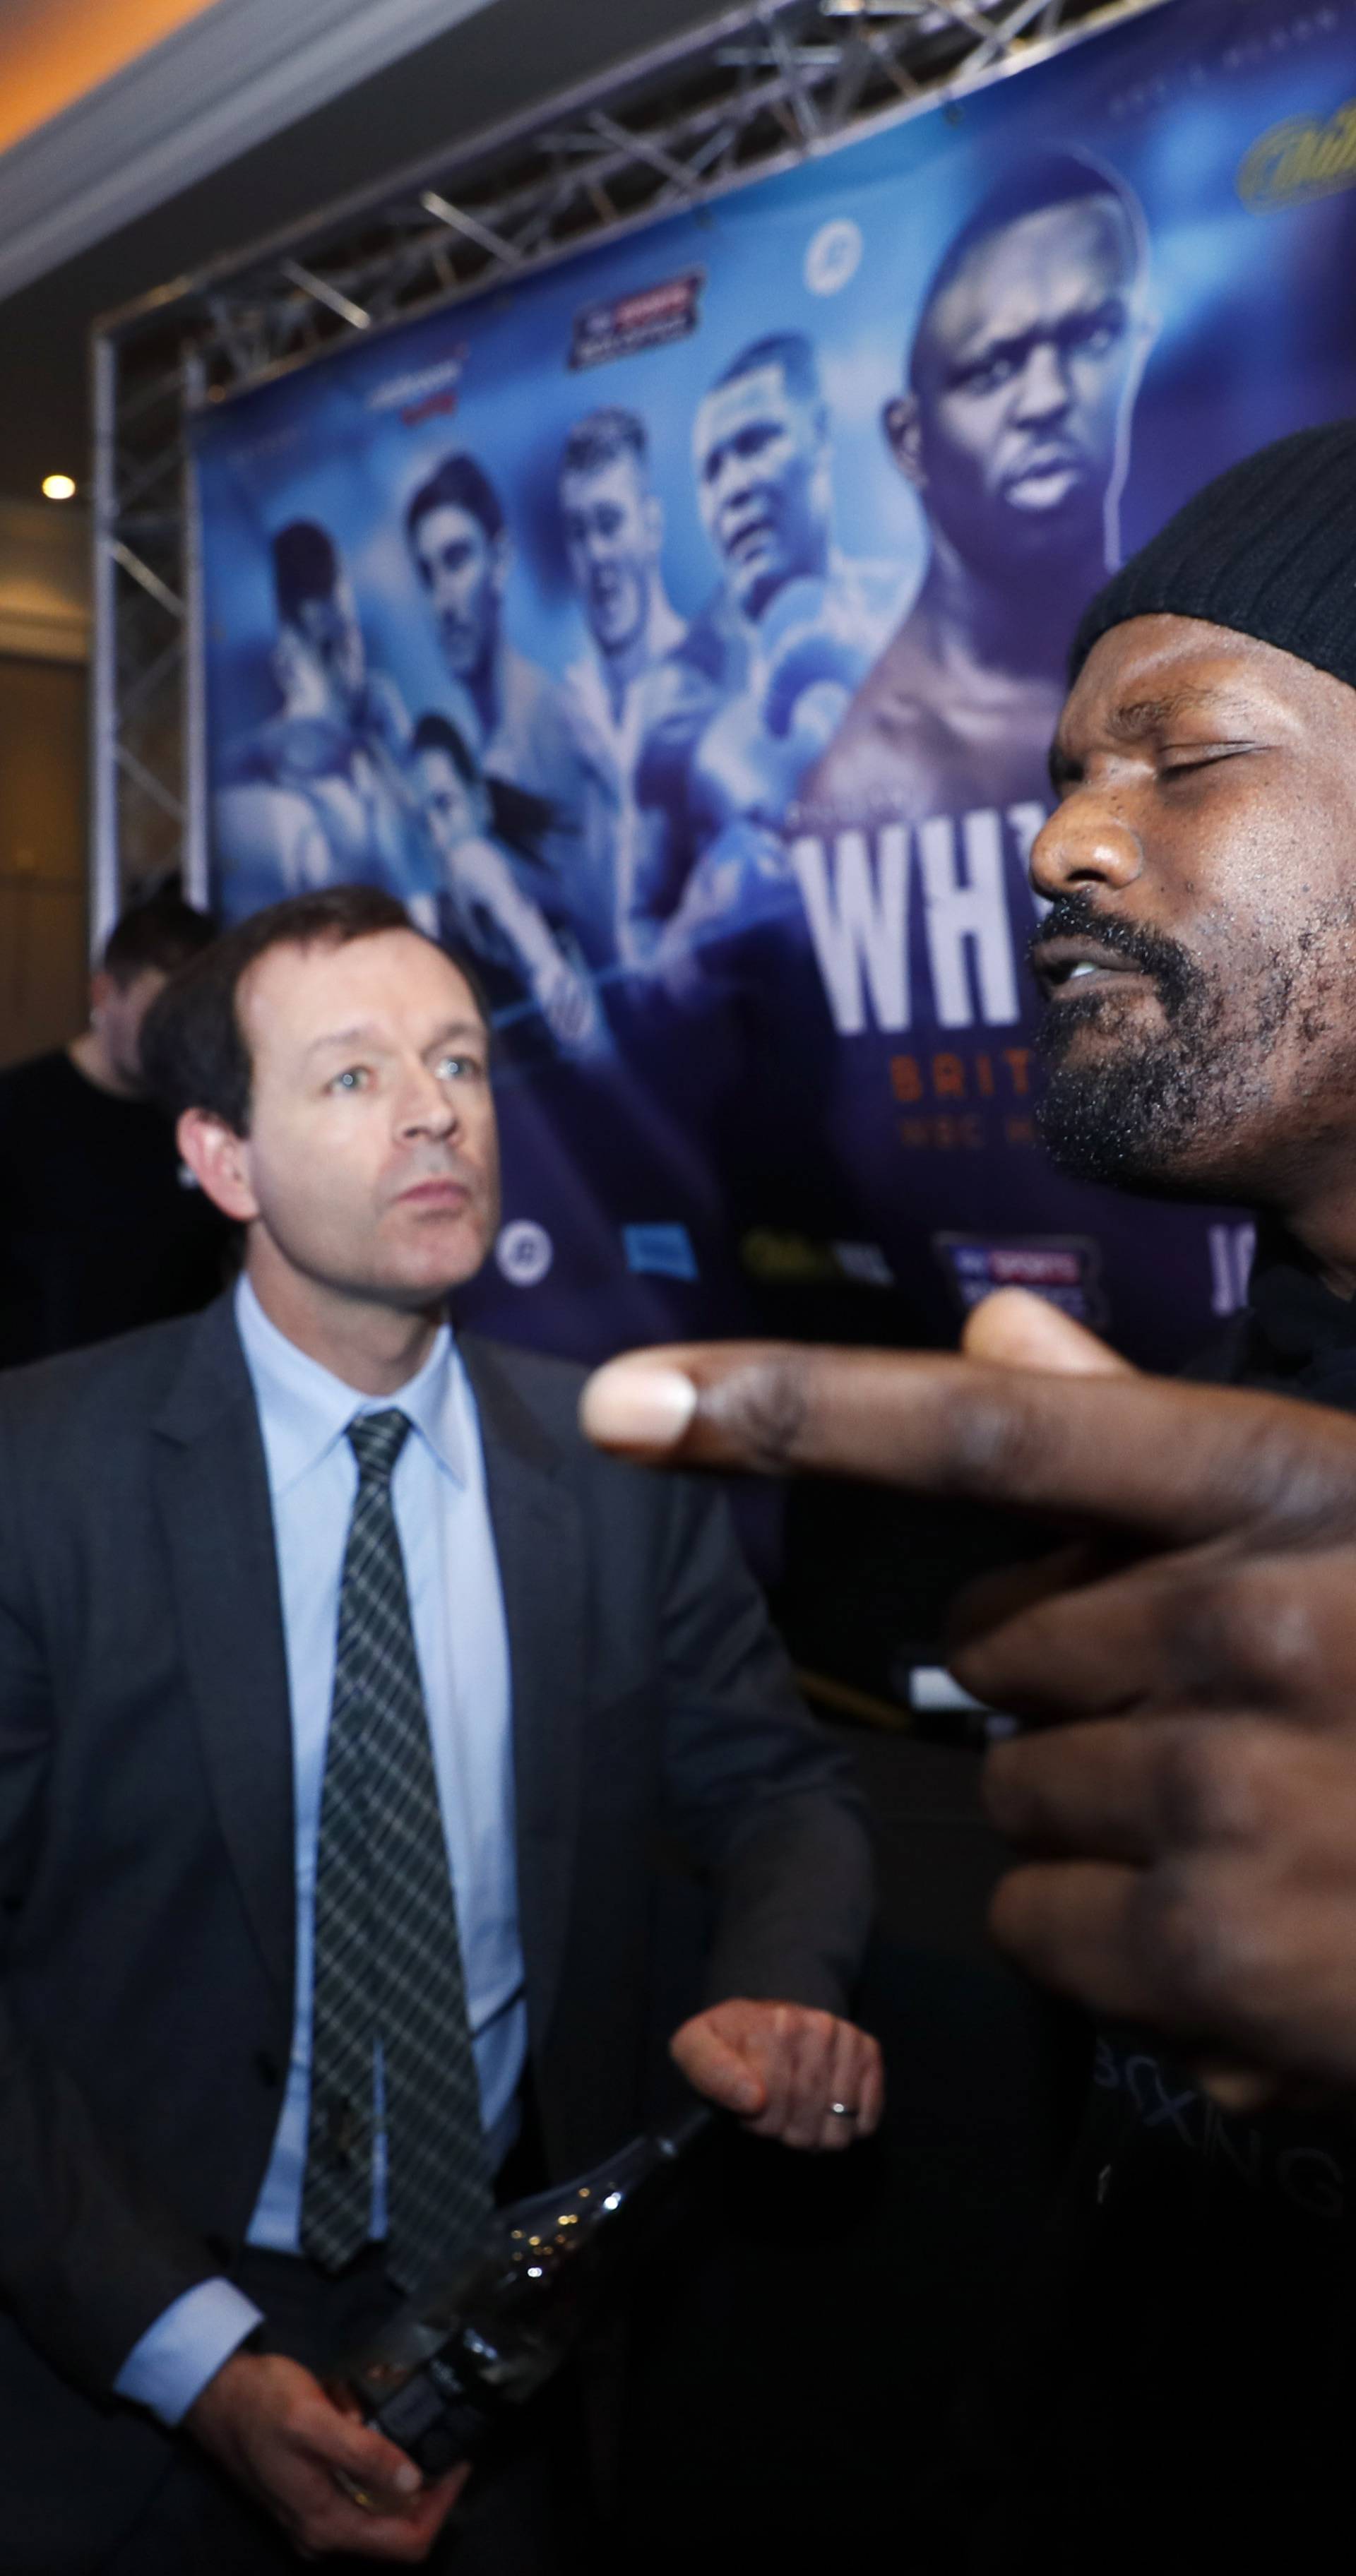 Sky Sports' Adam Smith and promoter Kalle Sauerland look on as Dereck Chisora gestures during the press conference